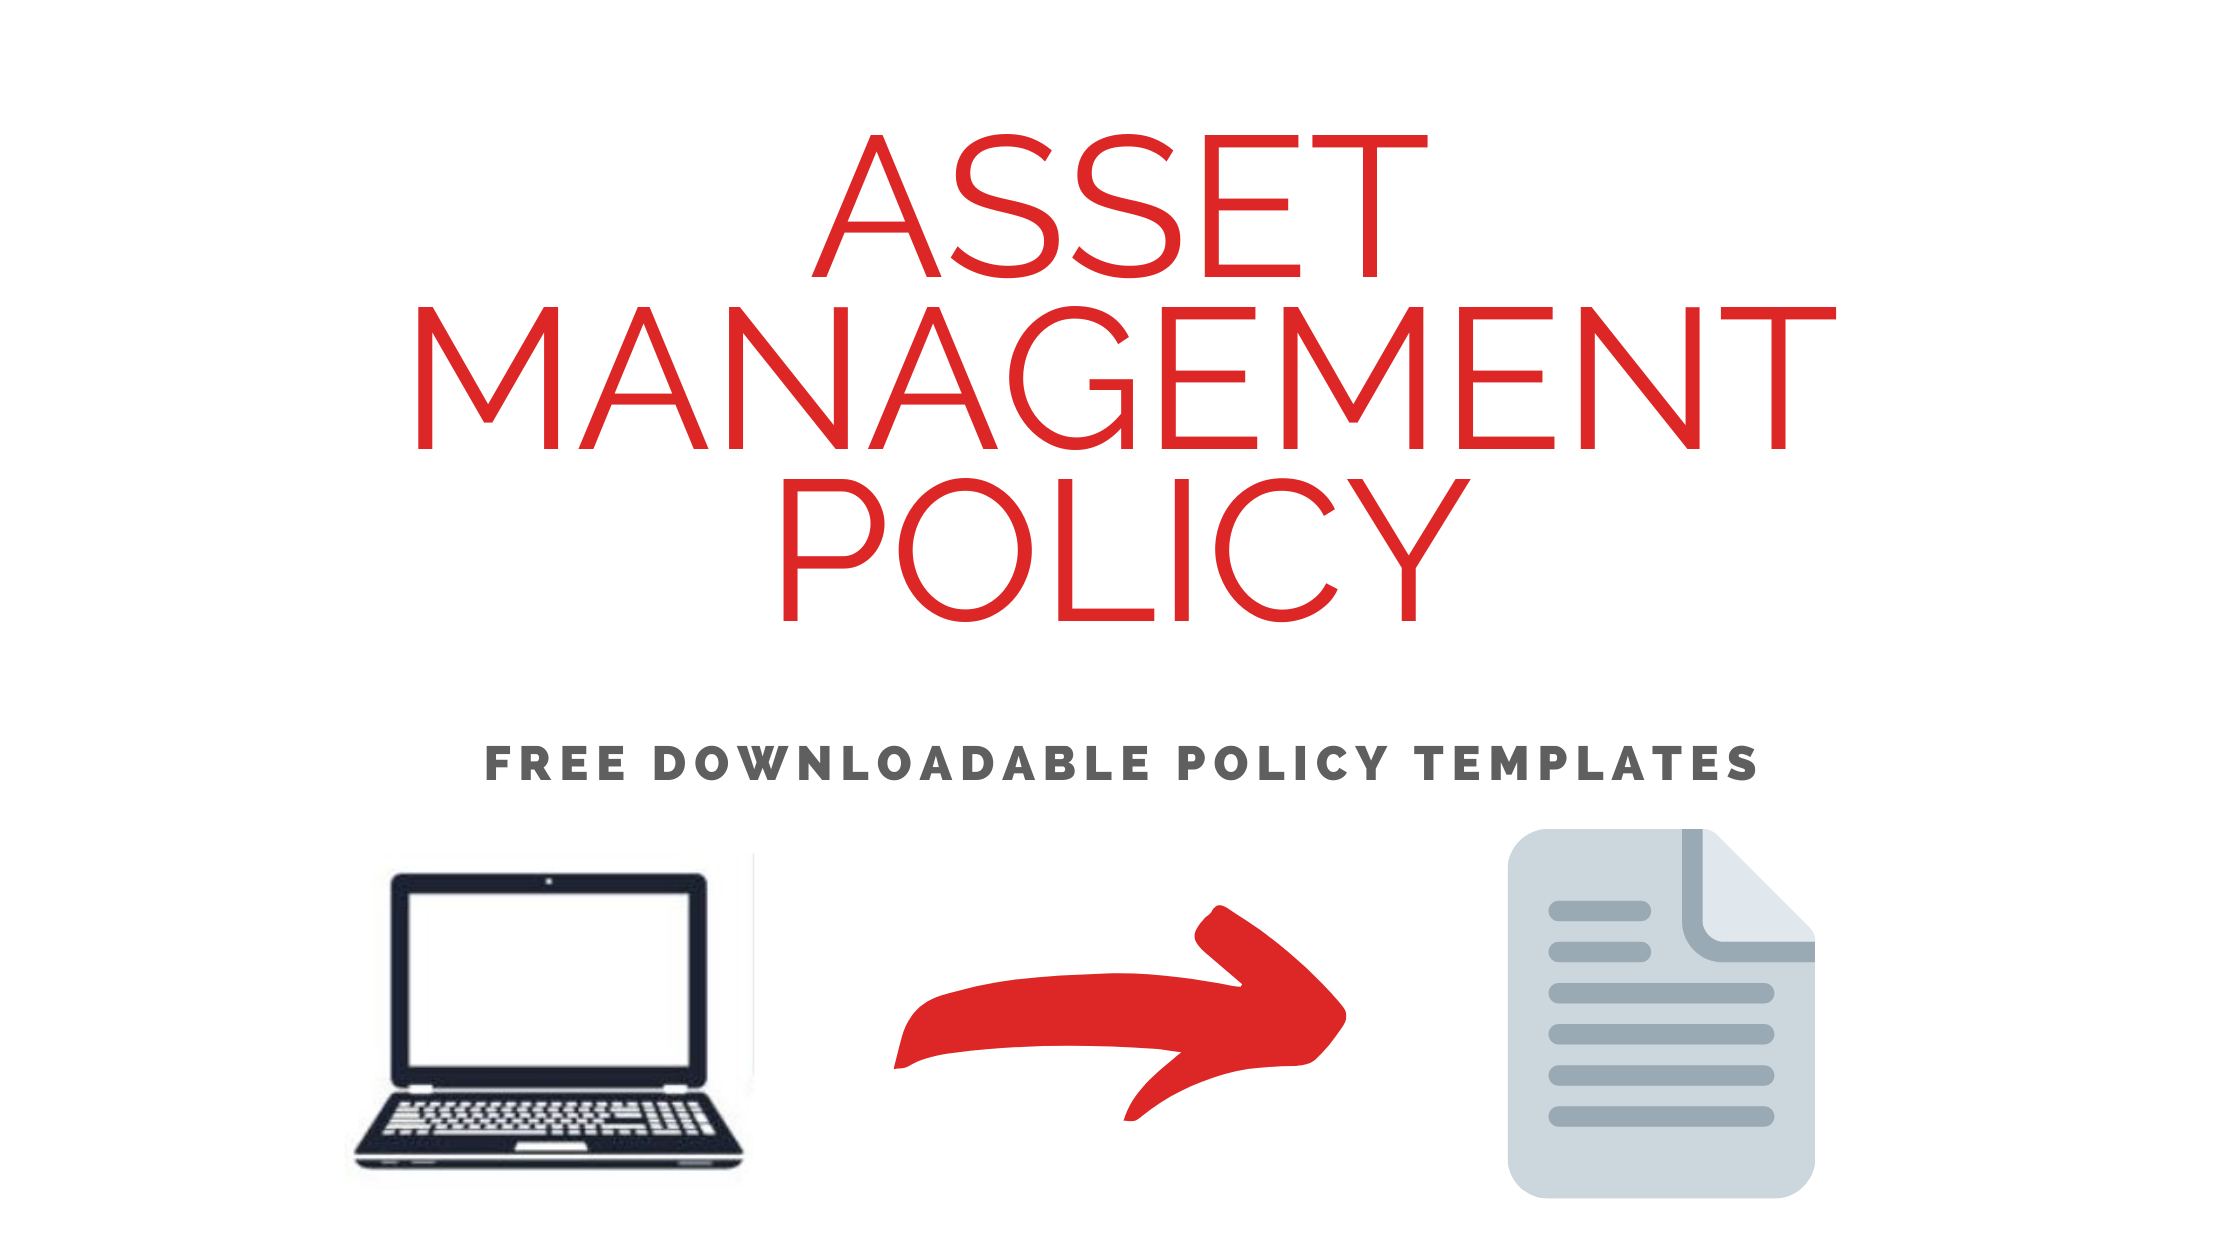 asset-management-policy-free-downloadable-policies-cybersecurity